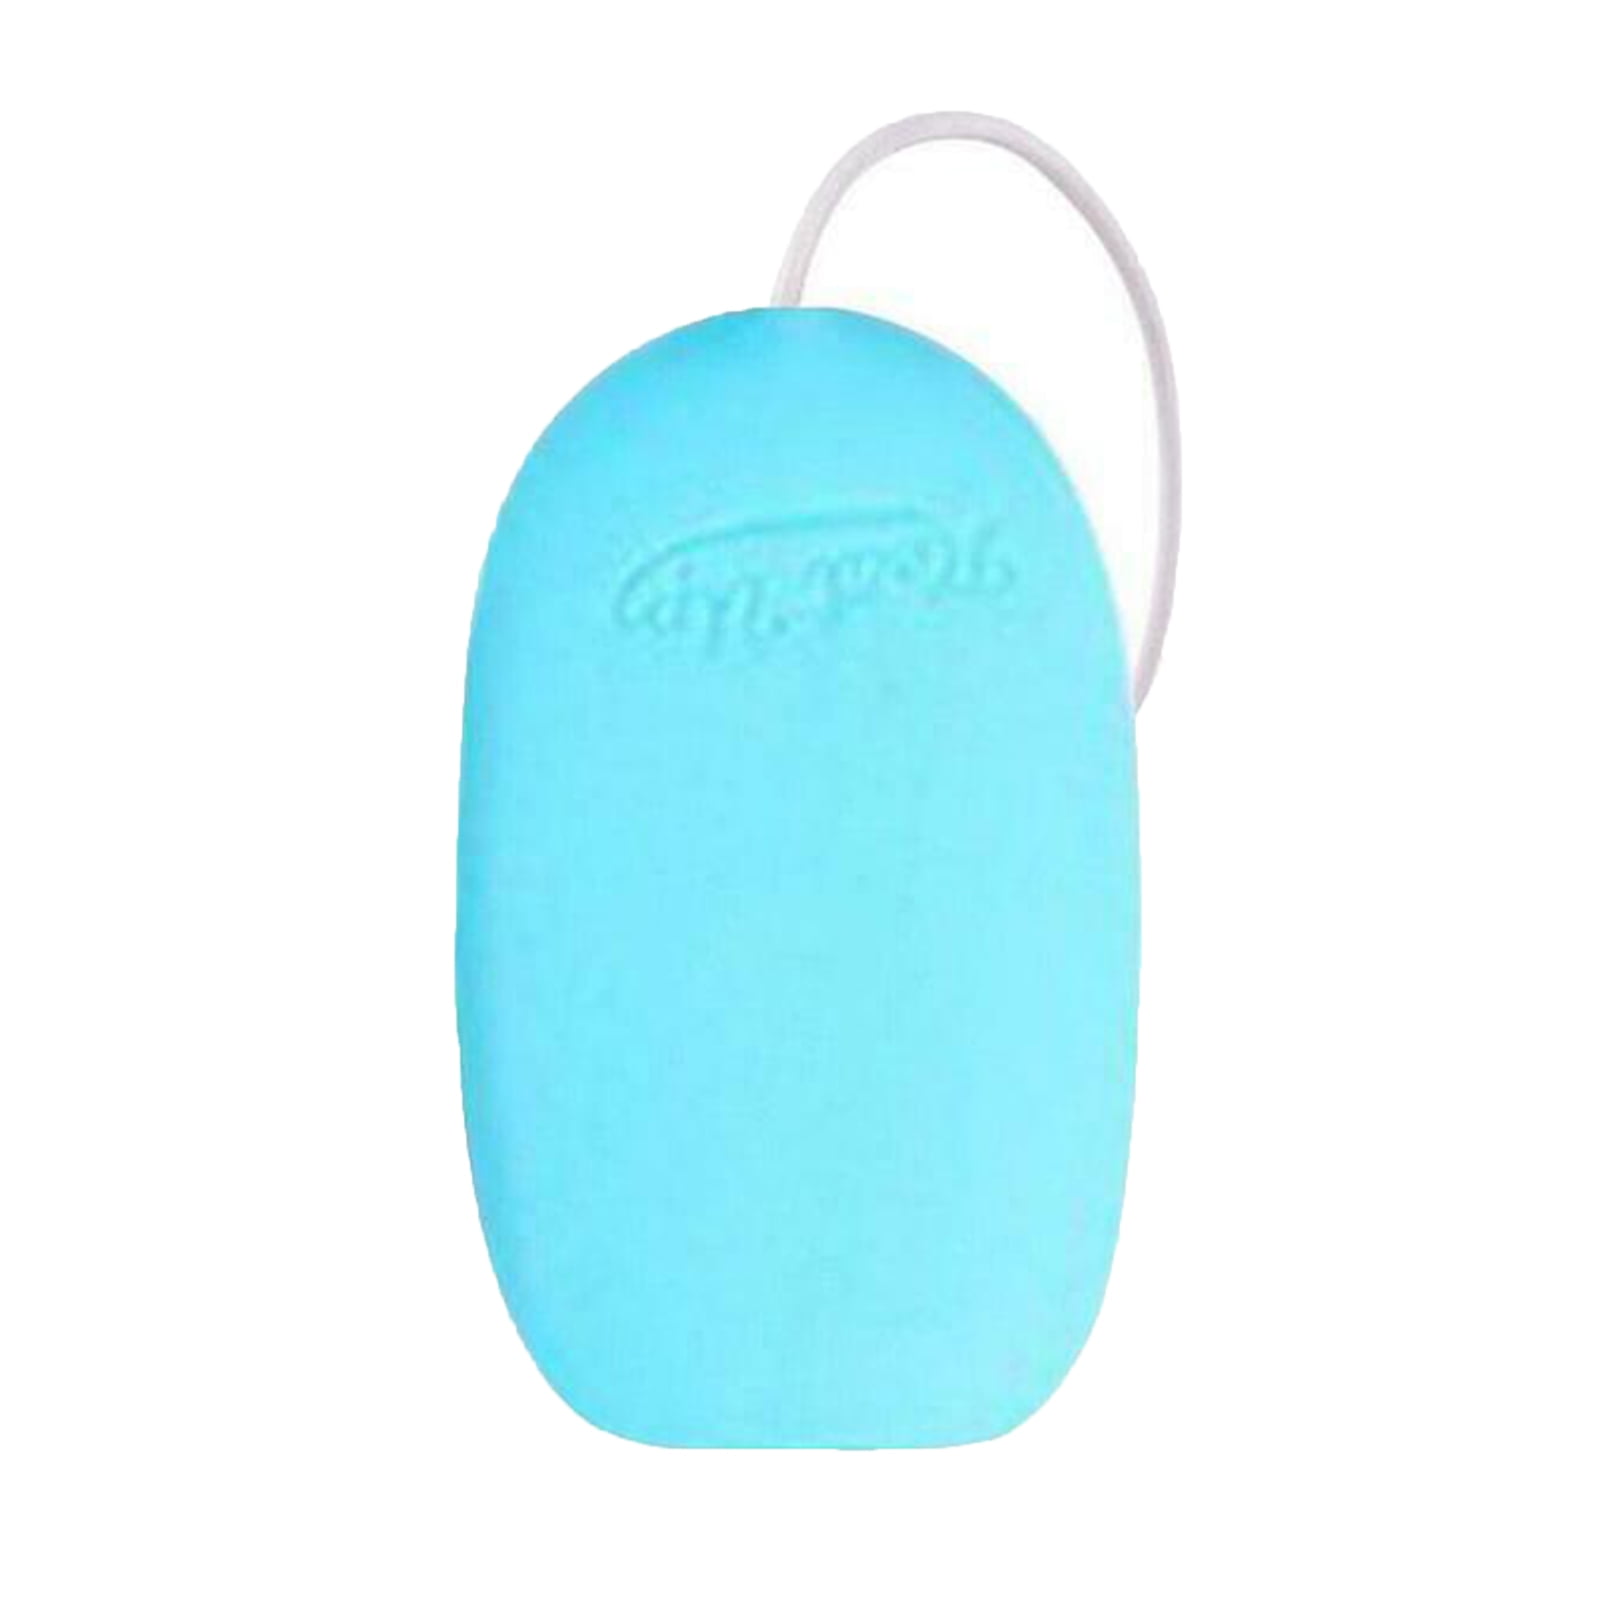 Details about   USB Rechargeable Hand Warmers  Cute Cat Quick Electric Pocket Hand warmer 